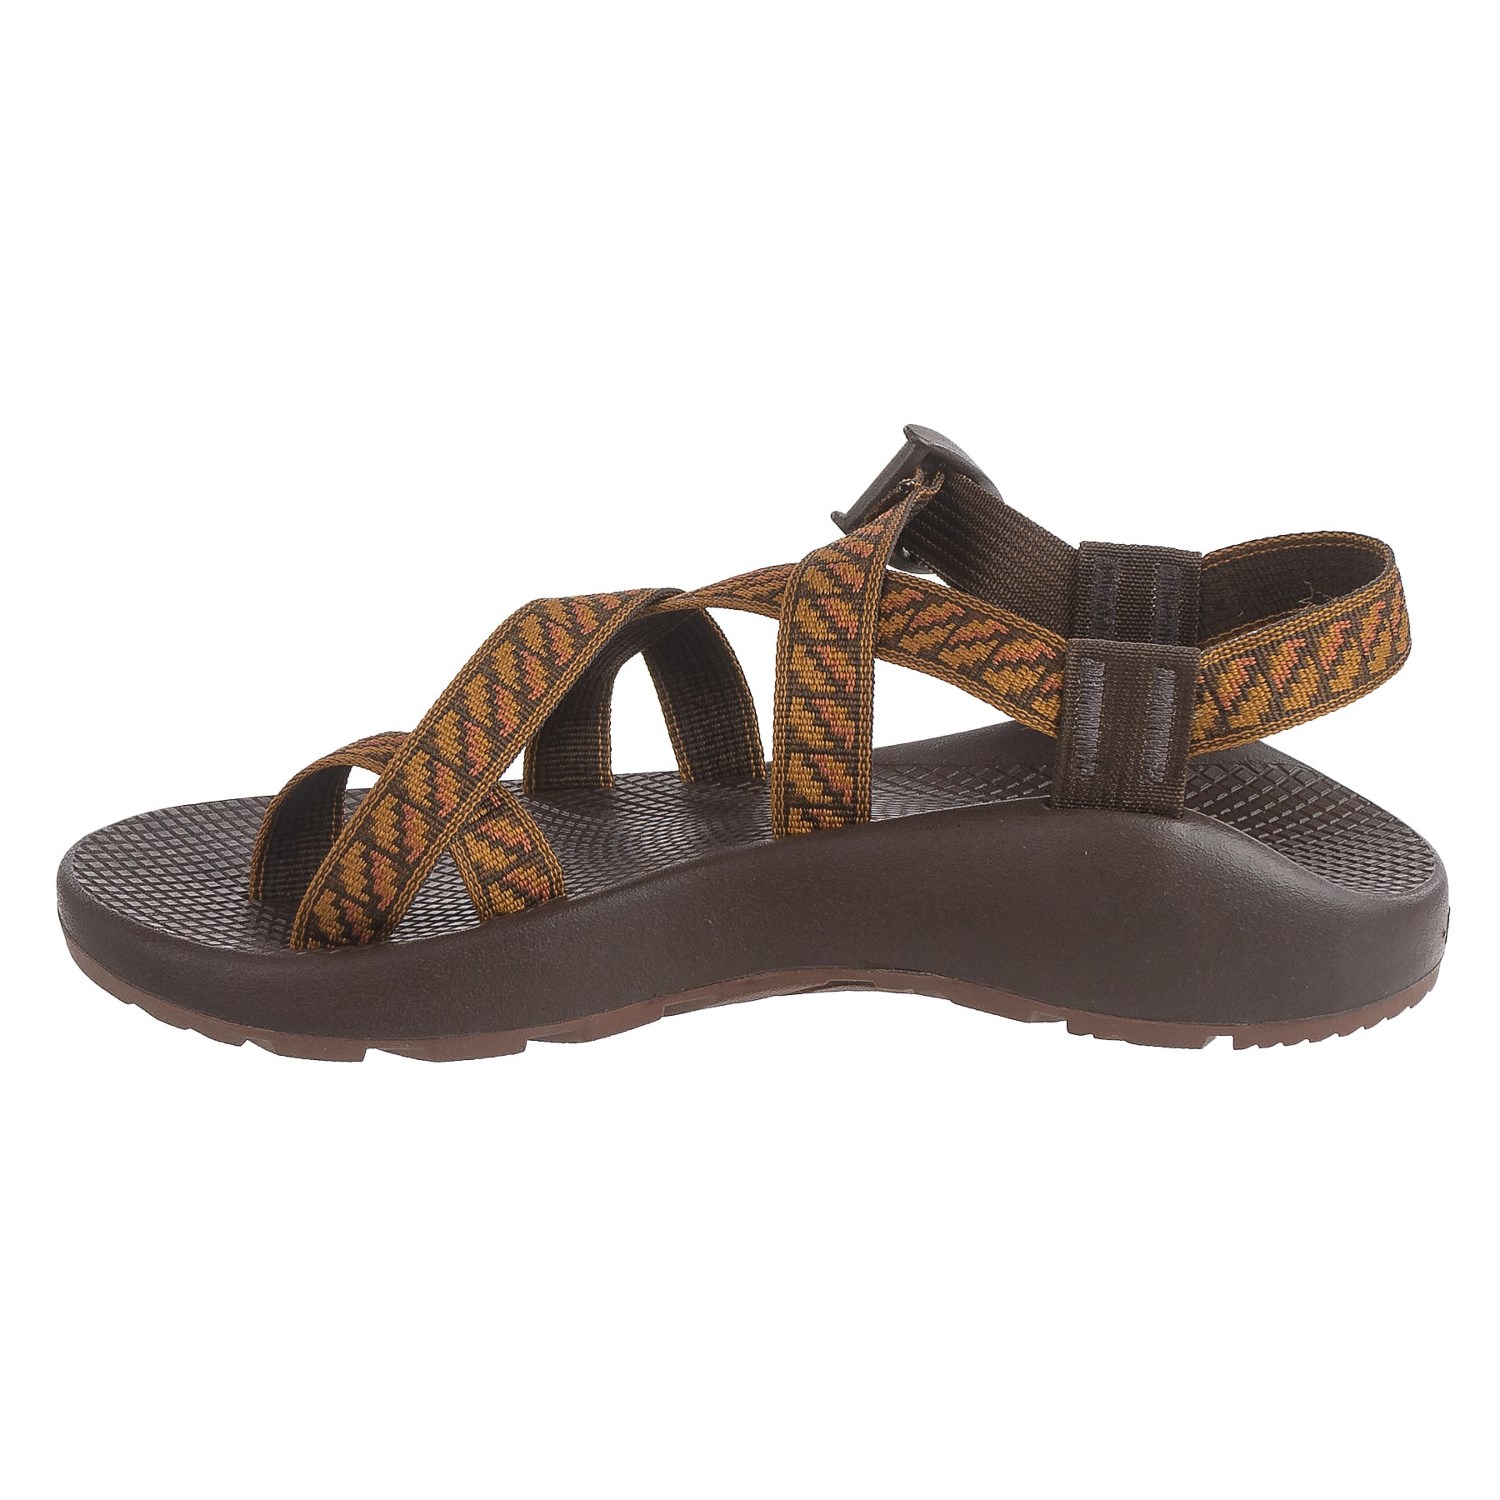 Chacos Z/2 Classic Mens Profile | Gear For Life